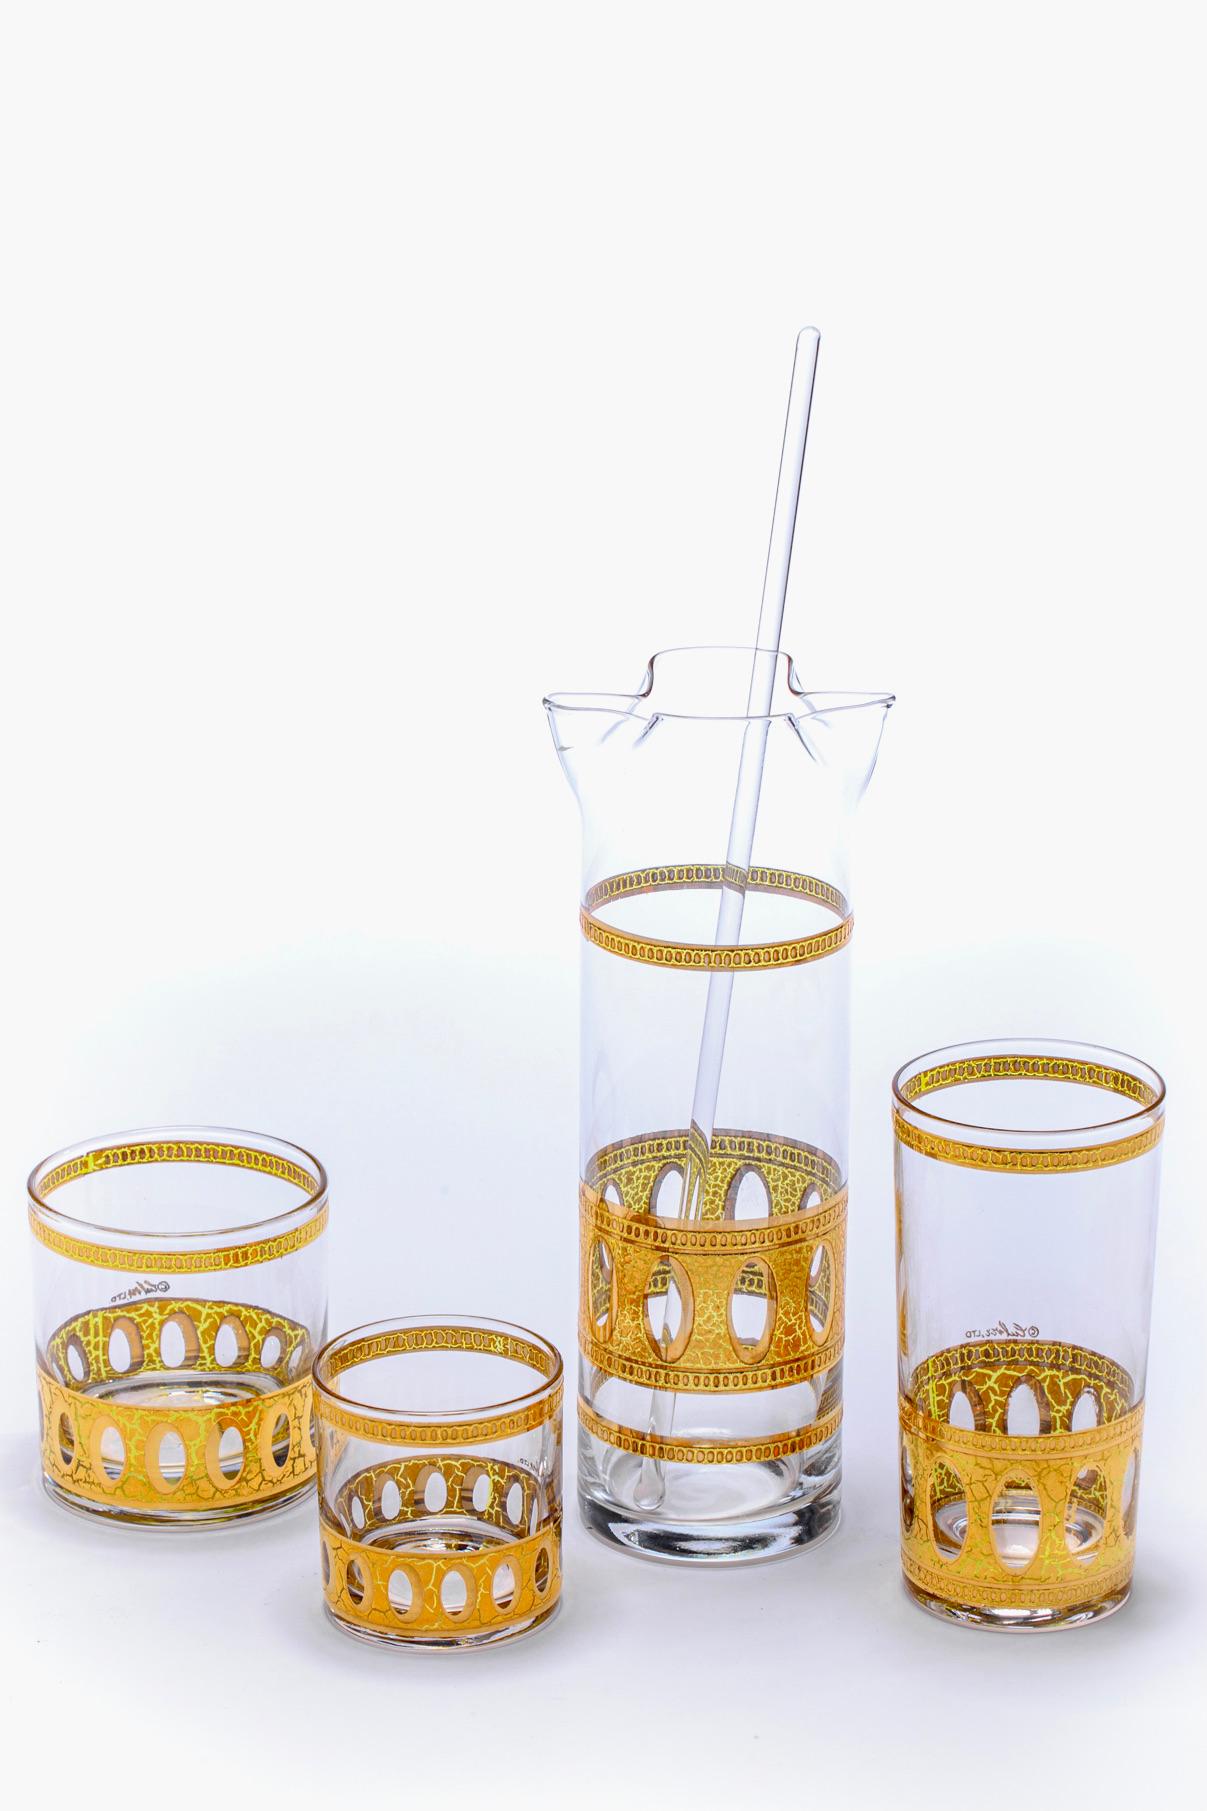 Mid-Century Modern Gold Plated Barware Set of Glasses & Mixer by Culver c. 1965 For Sale 7